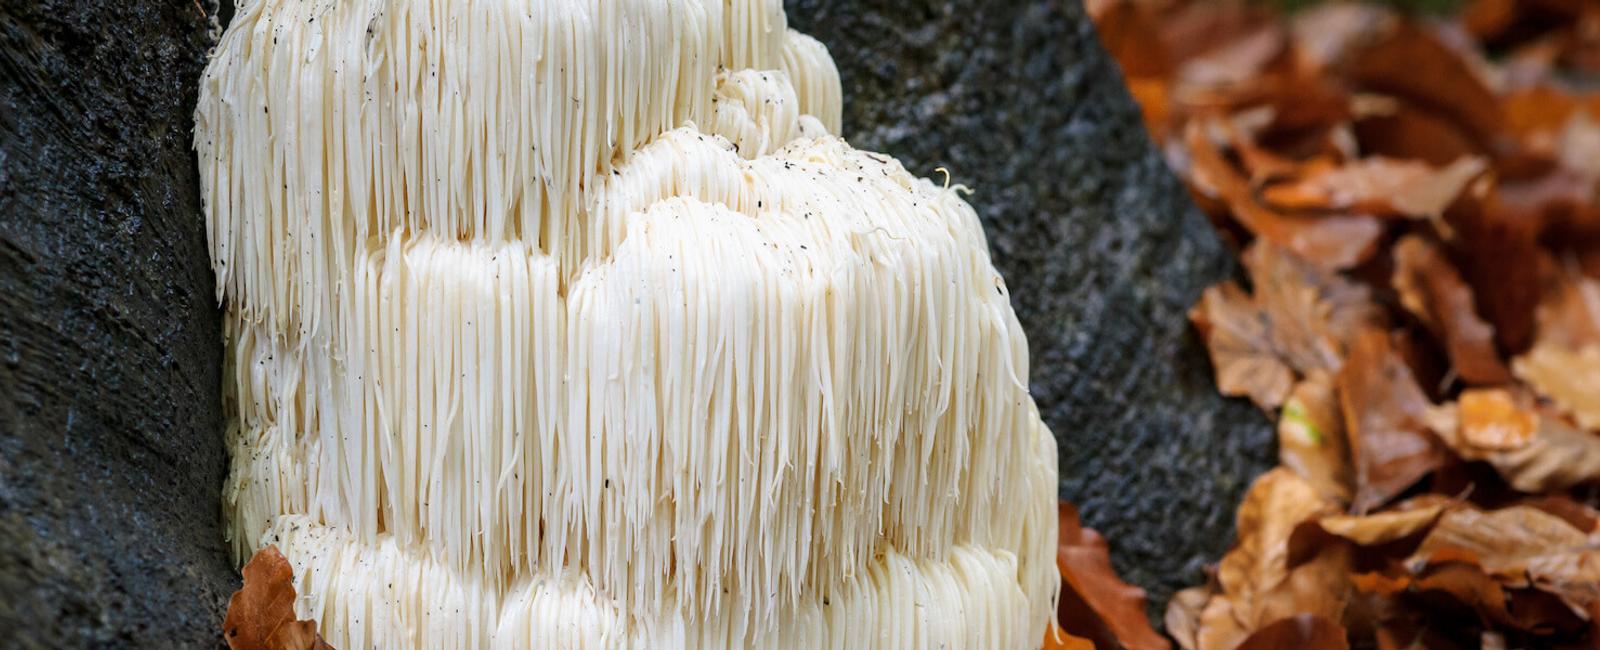 The Complete Guide to Lion’s Mane Mushrooms